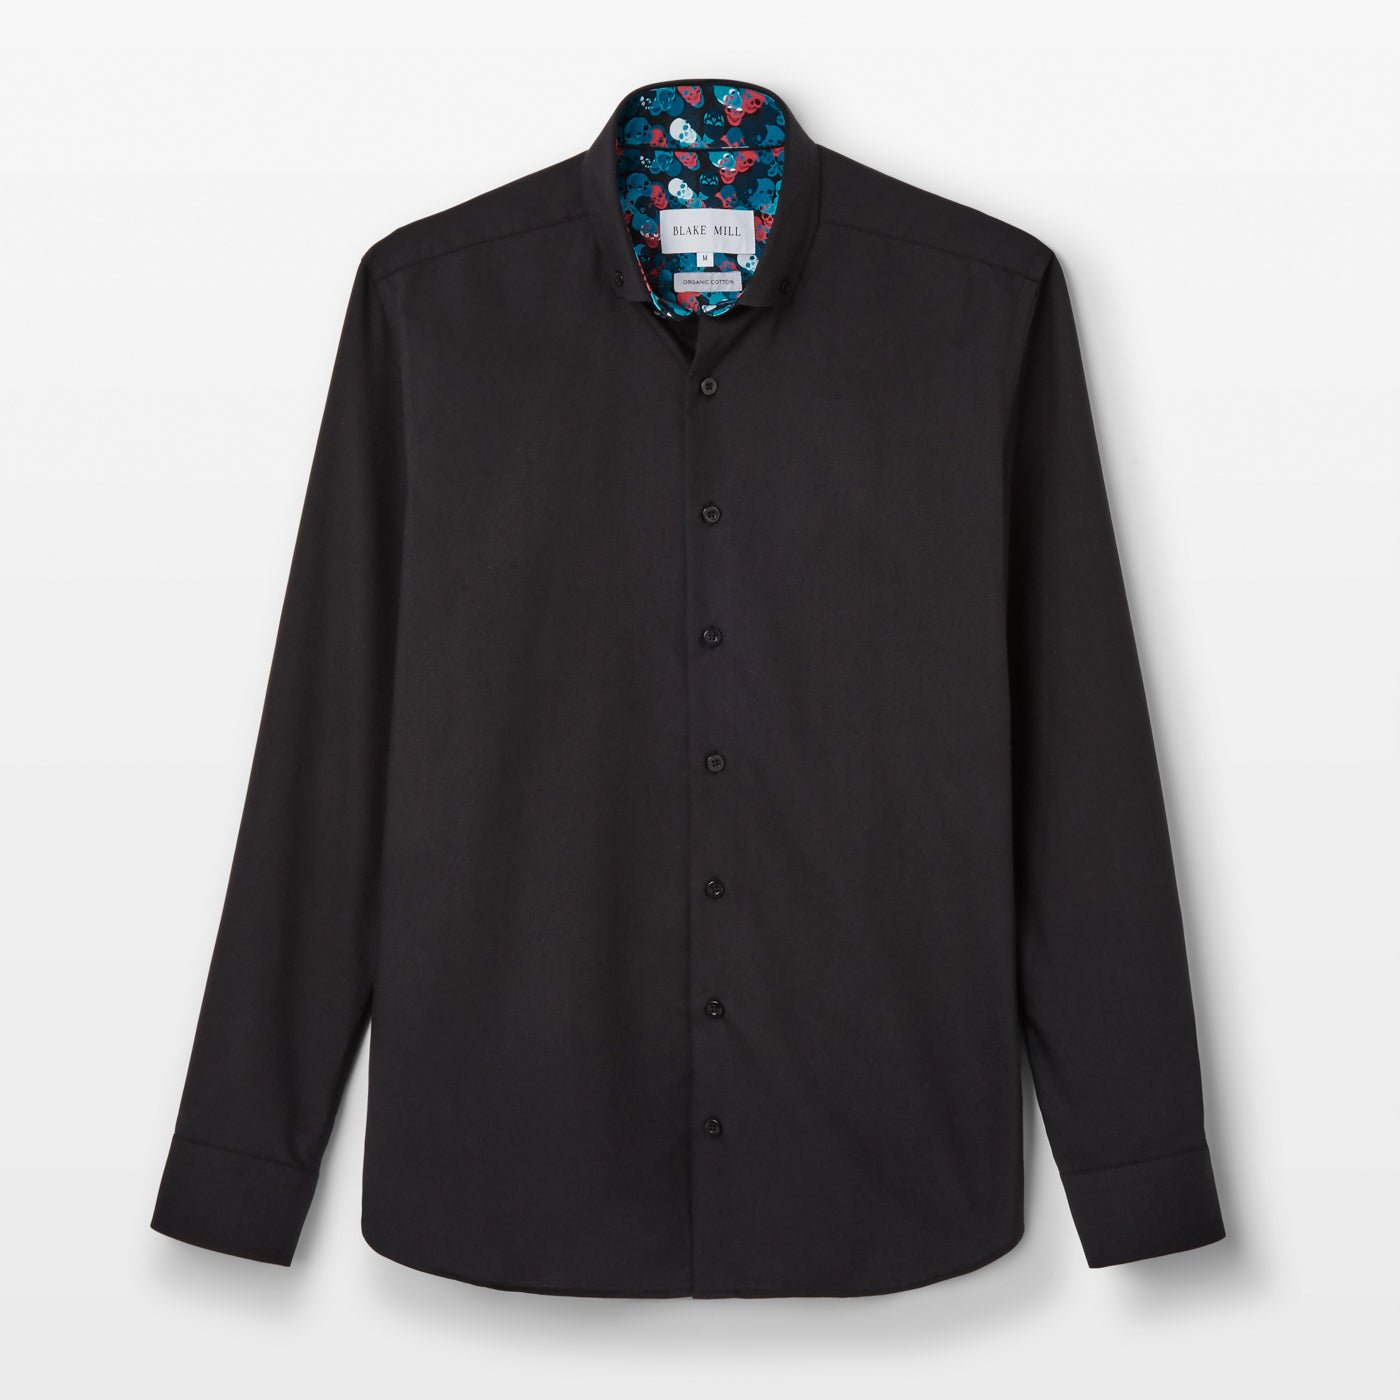 Black Oxford with Skulls Accents Button-Down Shirt - Blake Mill